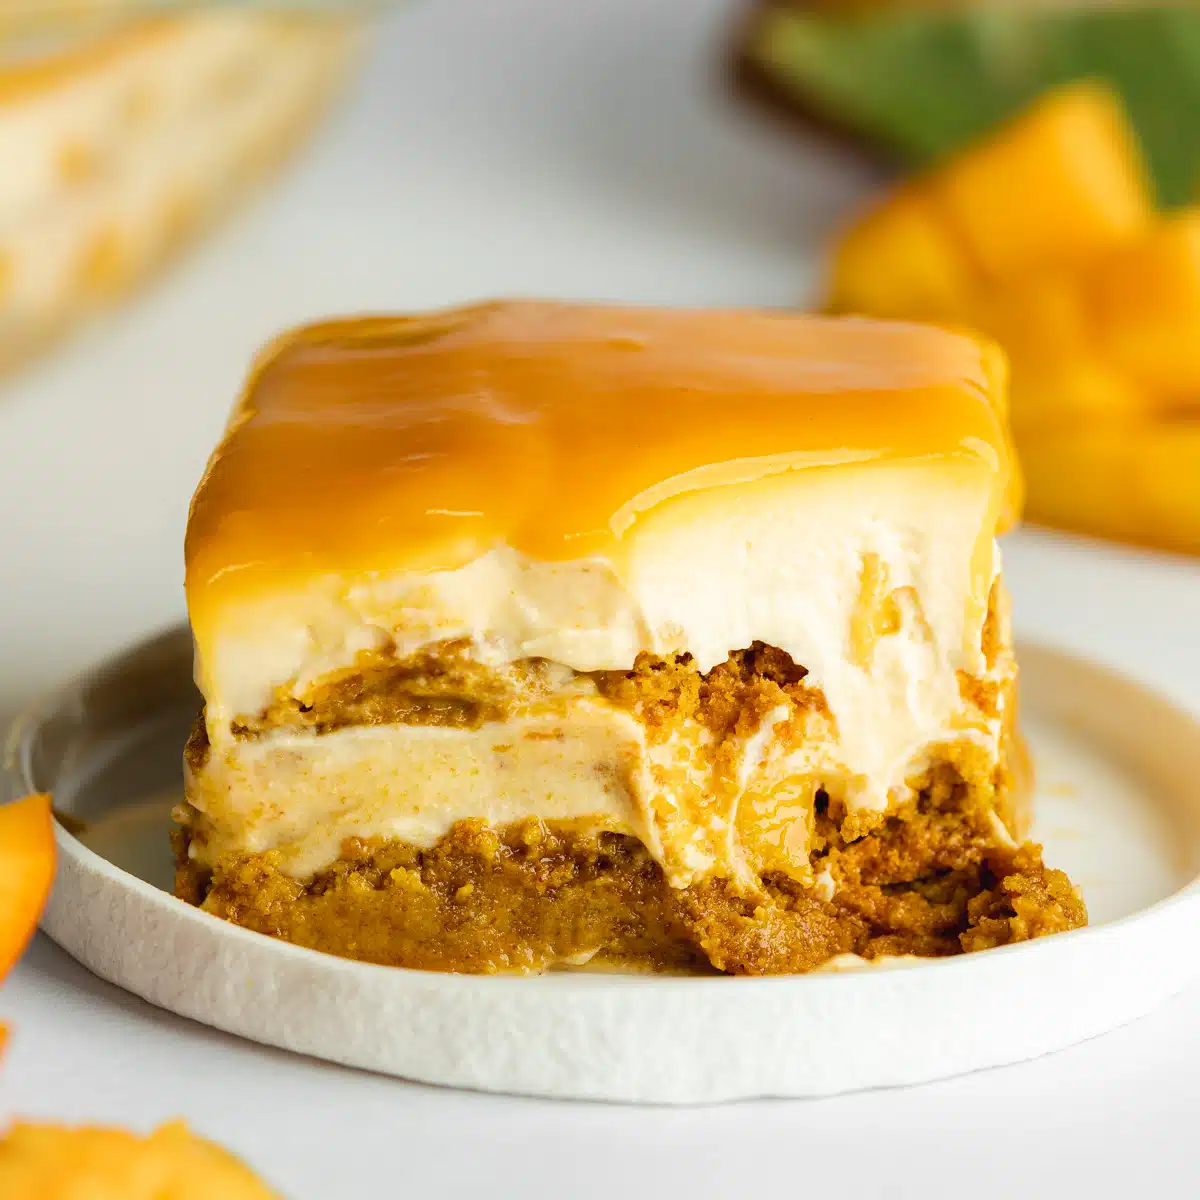 a slice of mango tiramisu on a small white ceramic plate with a spoonful taken from it showing the creamy consistency.